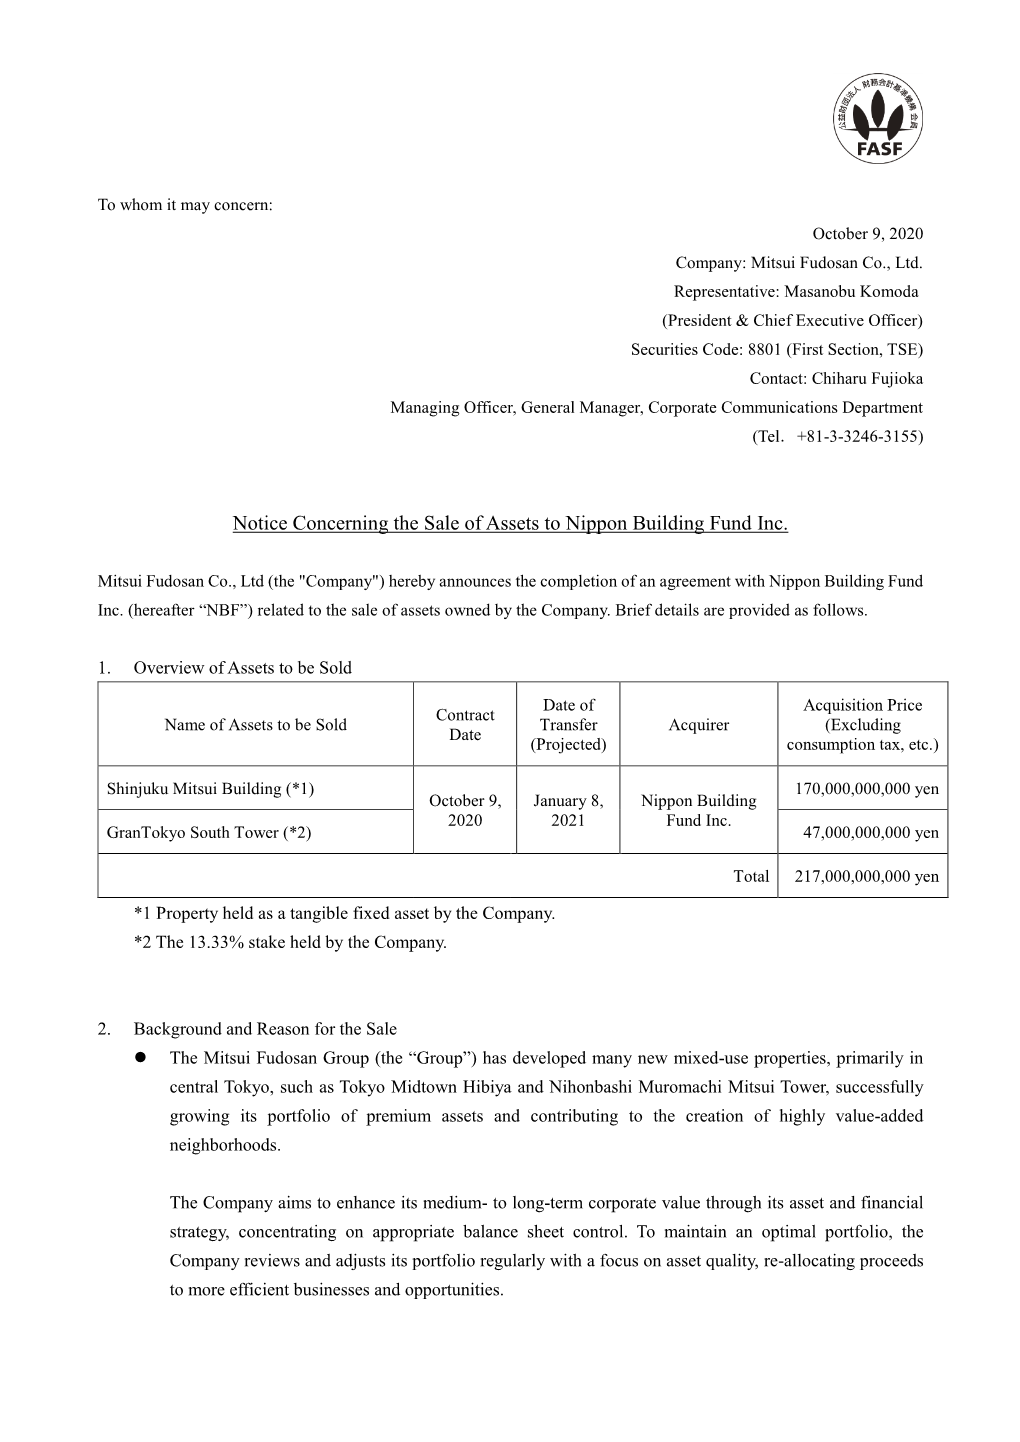 Notice Concerning the Sale of Assets to Nippon Building Fund Inc